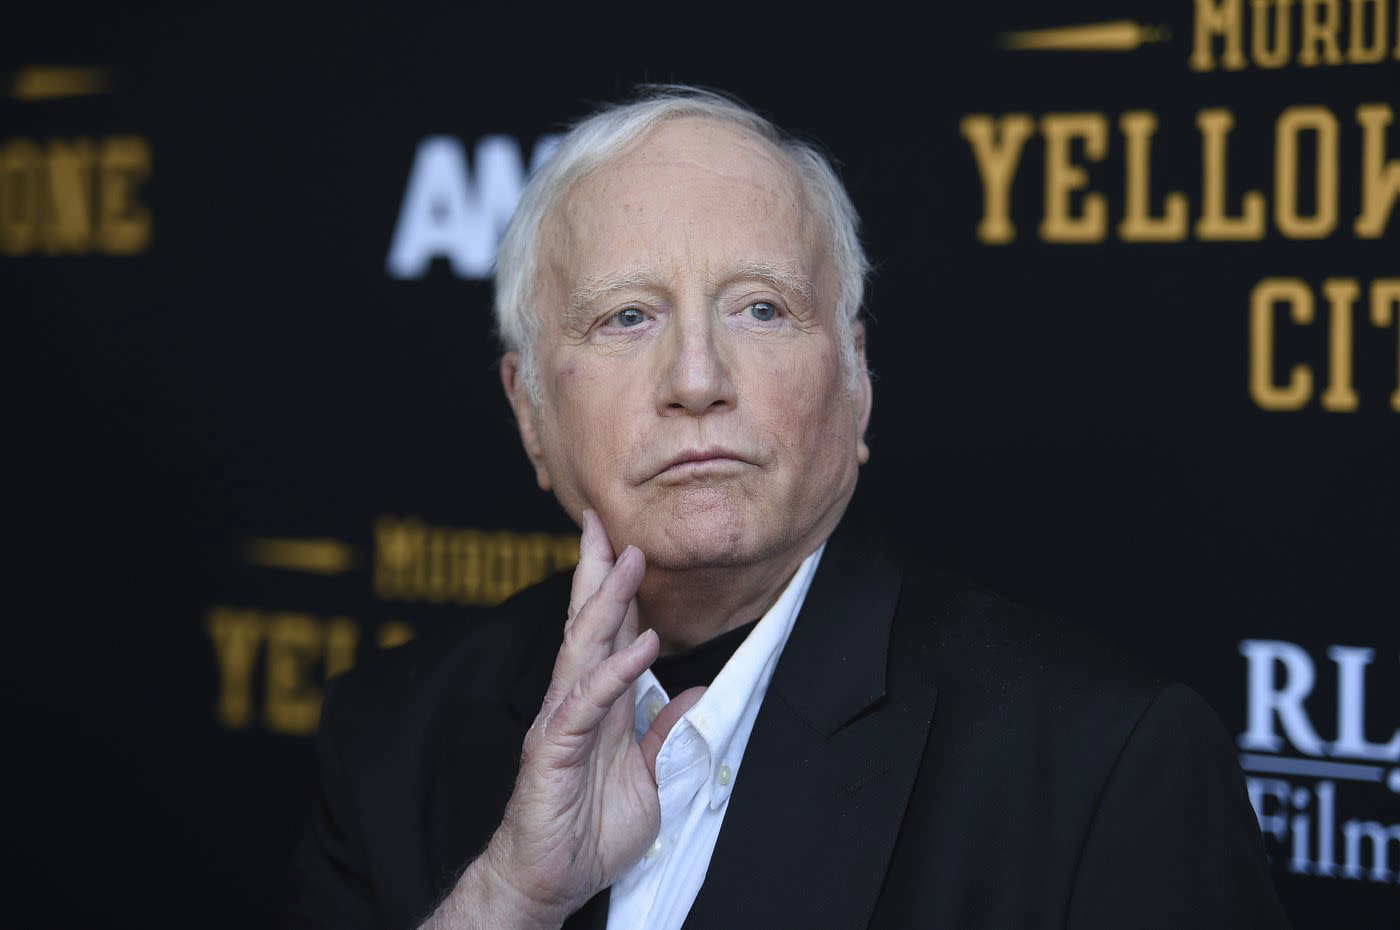 Richard Dreyfuss' comments about women, LGBTQ+ people and diversity lead venue to apologize